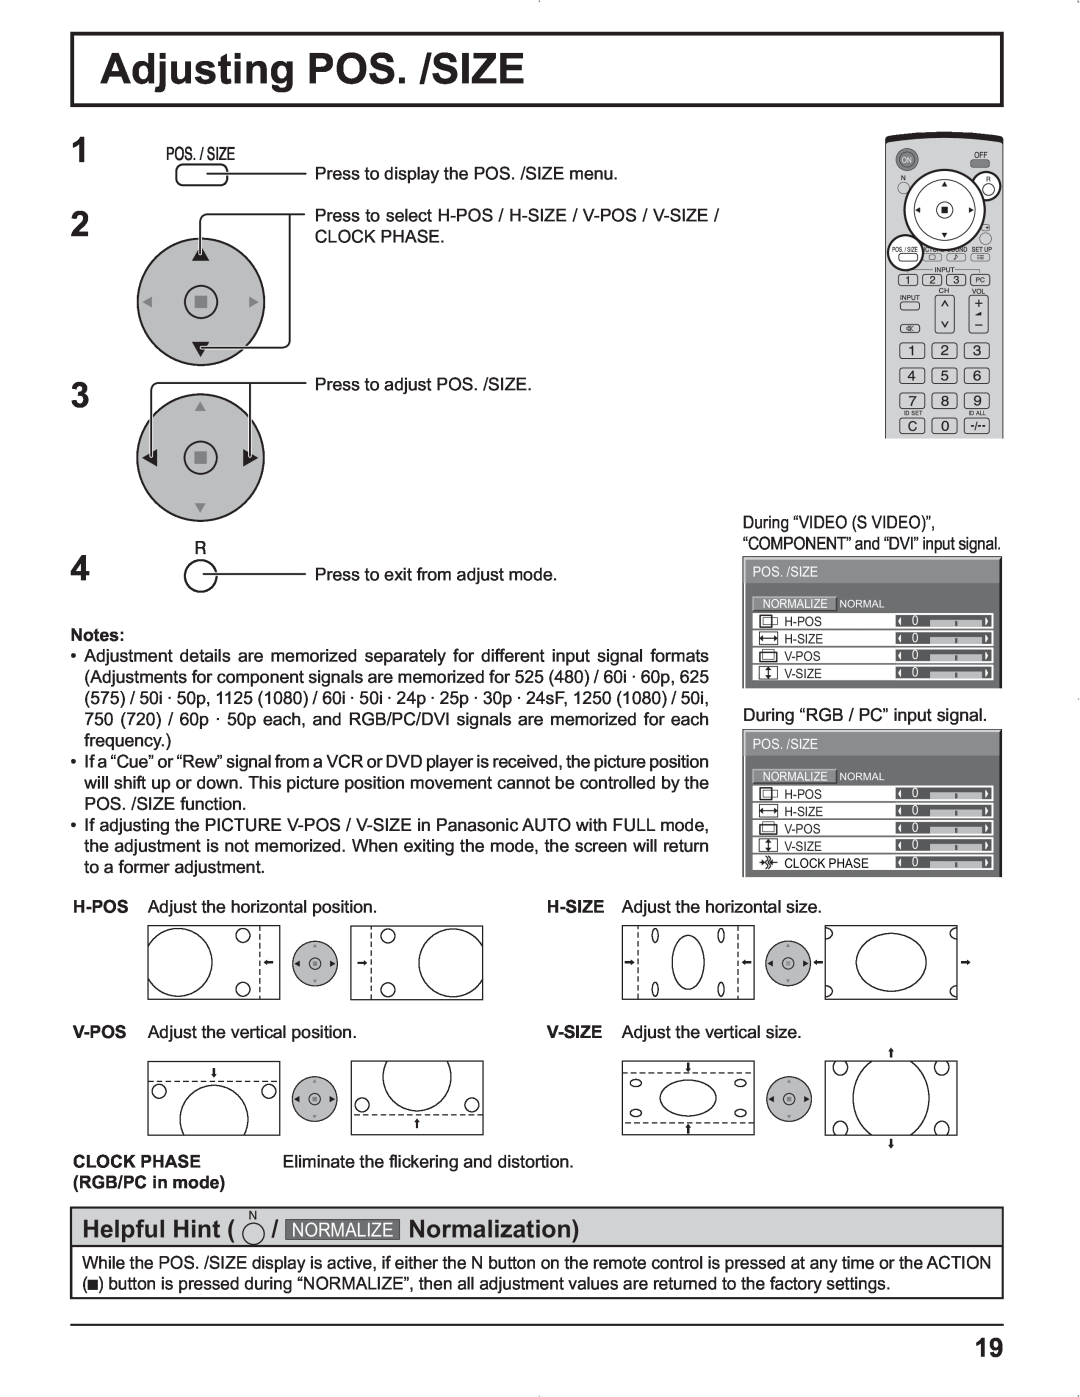 Panasonic TH-42PR9U, TH-37PR9U, TH-37PG9U, TH-42PG9U manual Adjusting POS. /SIZE, Helpful Hint, Normalization, Normalize 